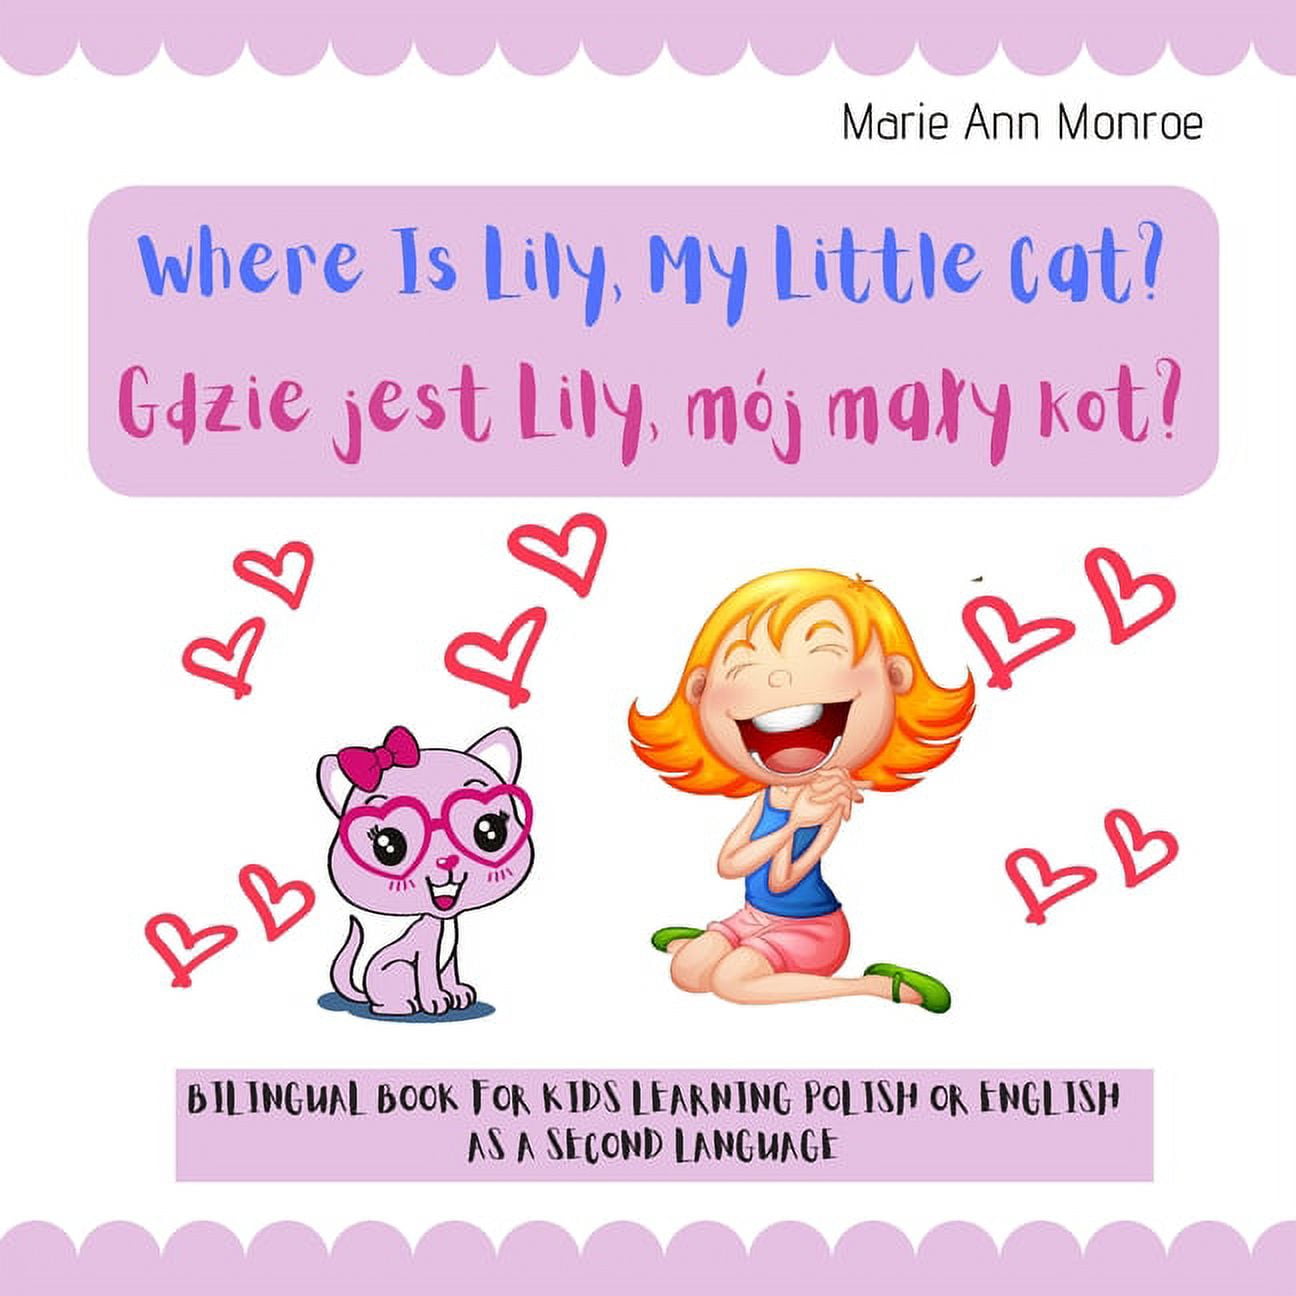 Where is Lily, My Little Cat? Gdzie Jest Lily, Mój Maly Kot?: Bilingual Picture Book For Kids / Polish & English Learning & Teaching / Polski Angielski / Edition for Girls [Book]